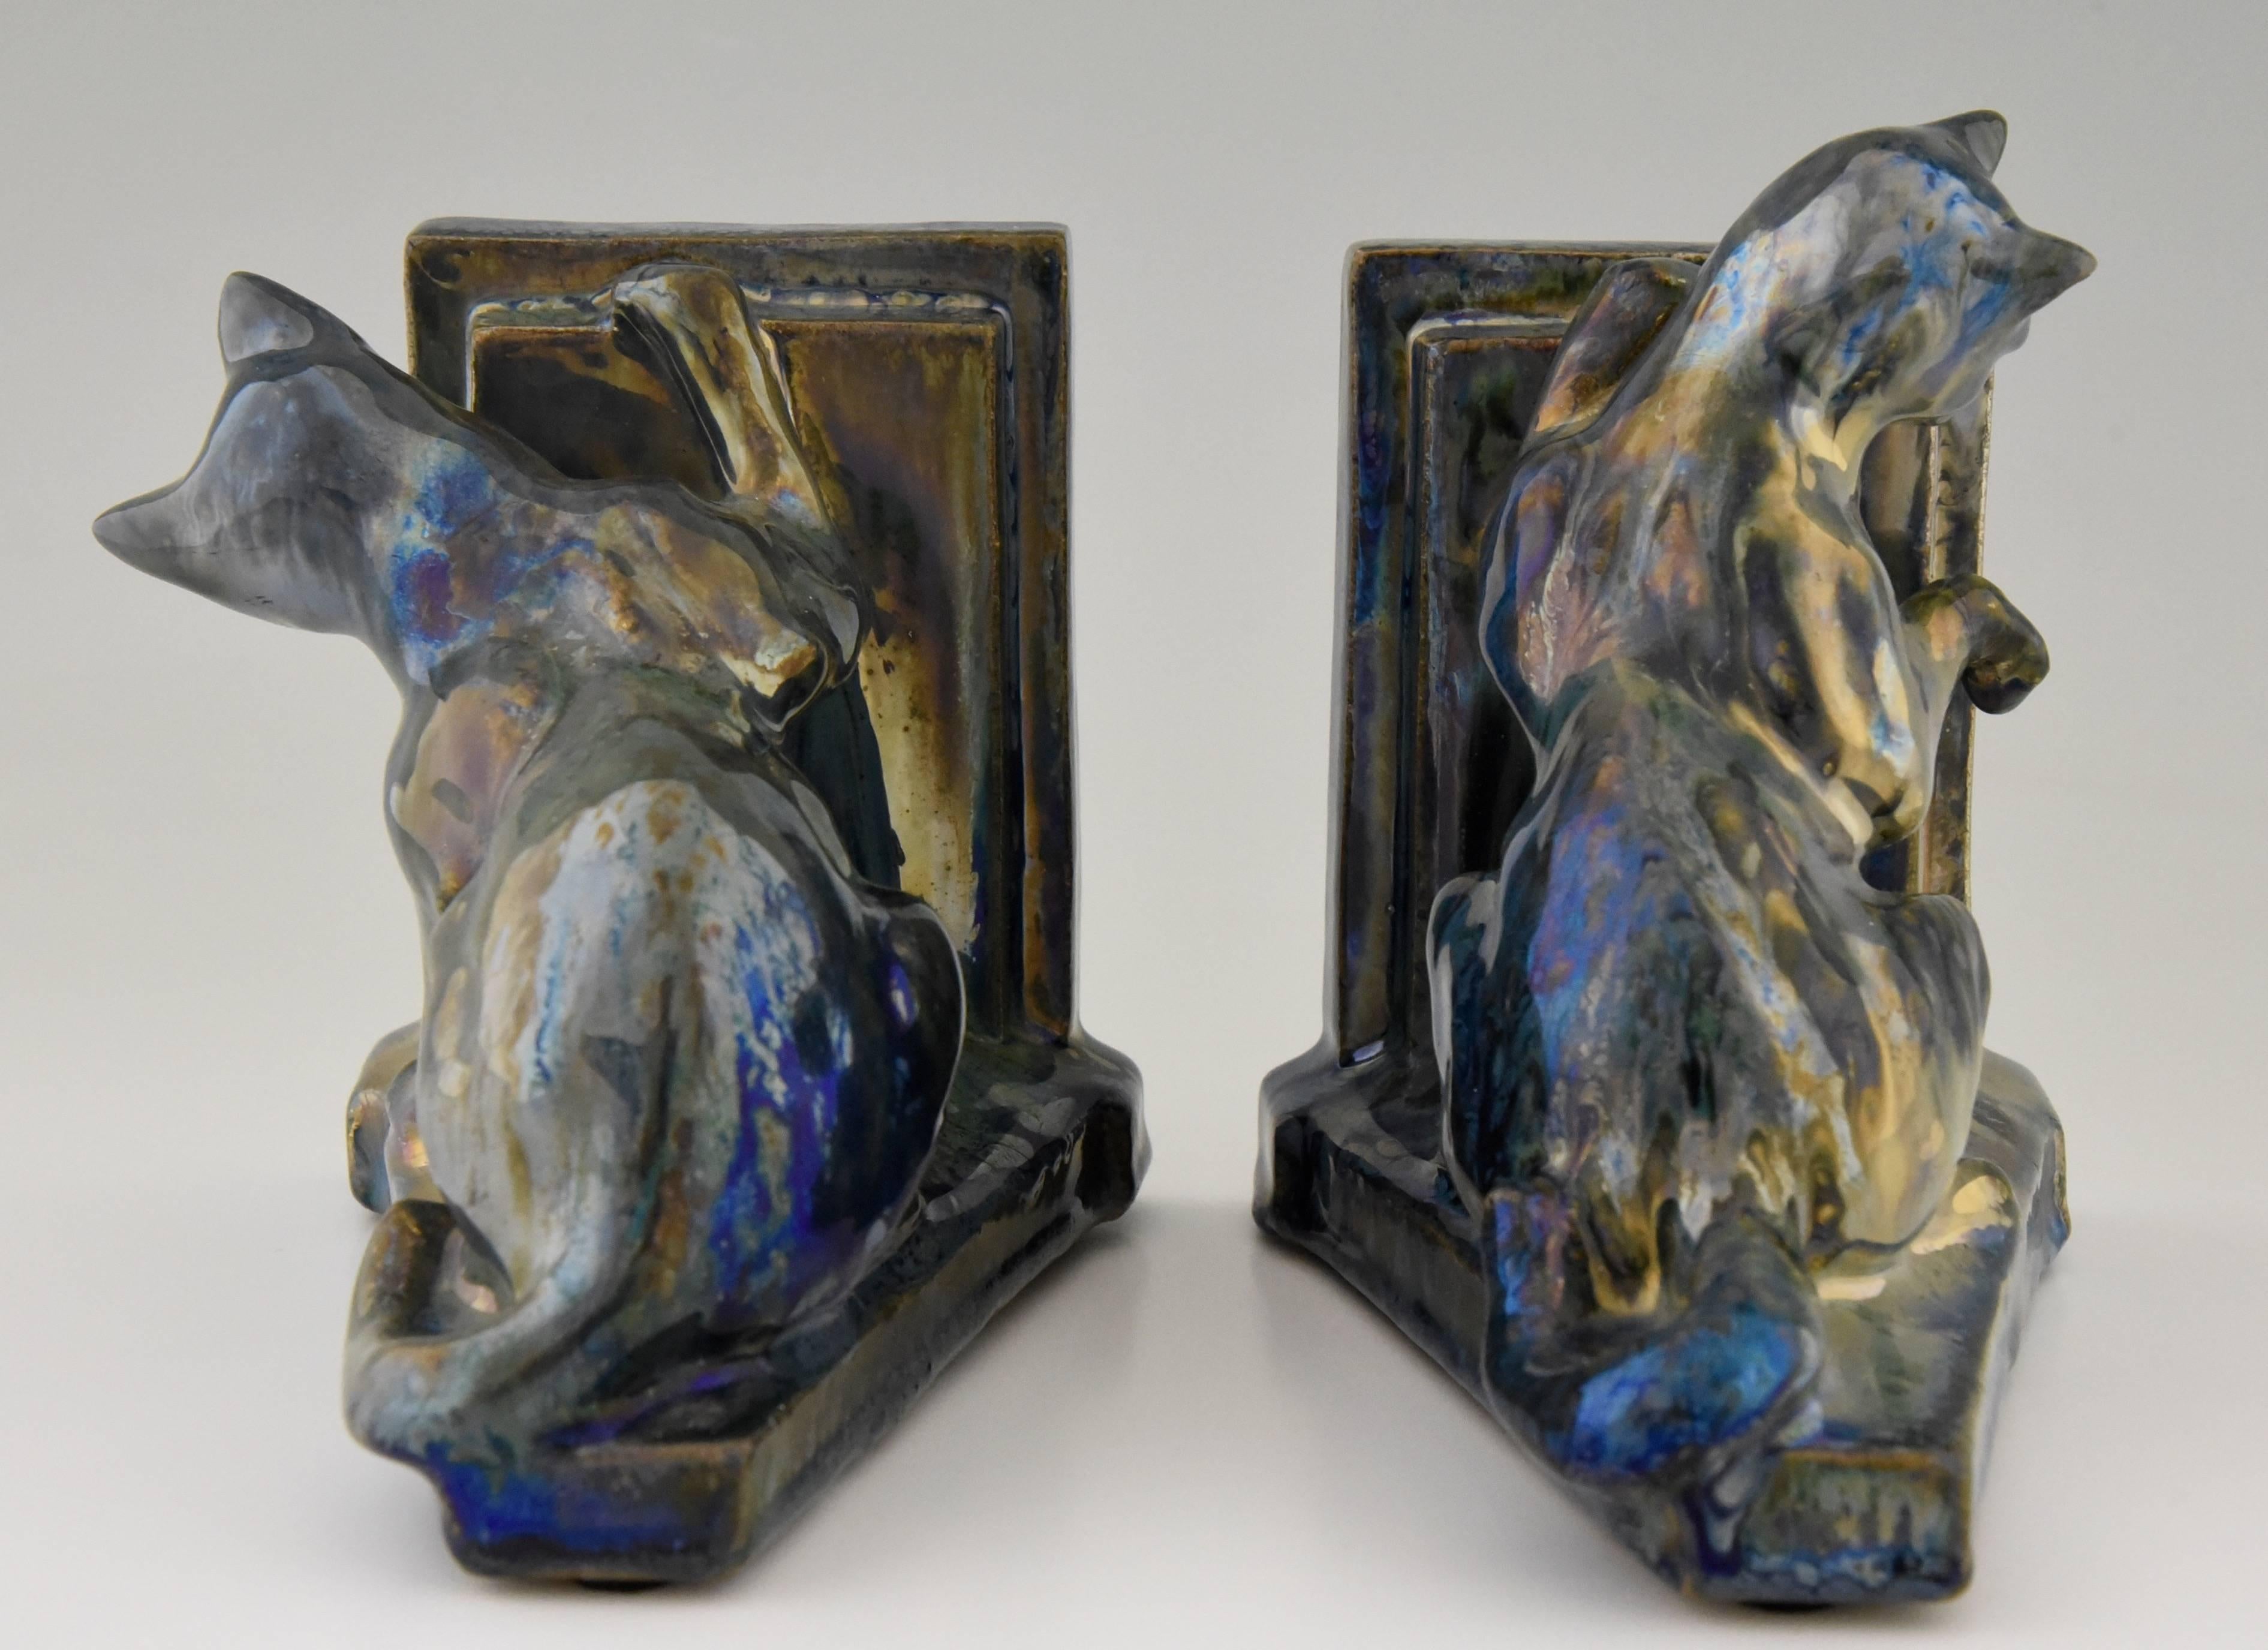 20th Century Art Deco Ceramic Cat Bookends A. Cytère for Rambervillers, 1931